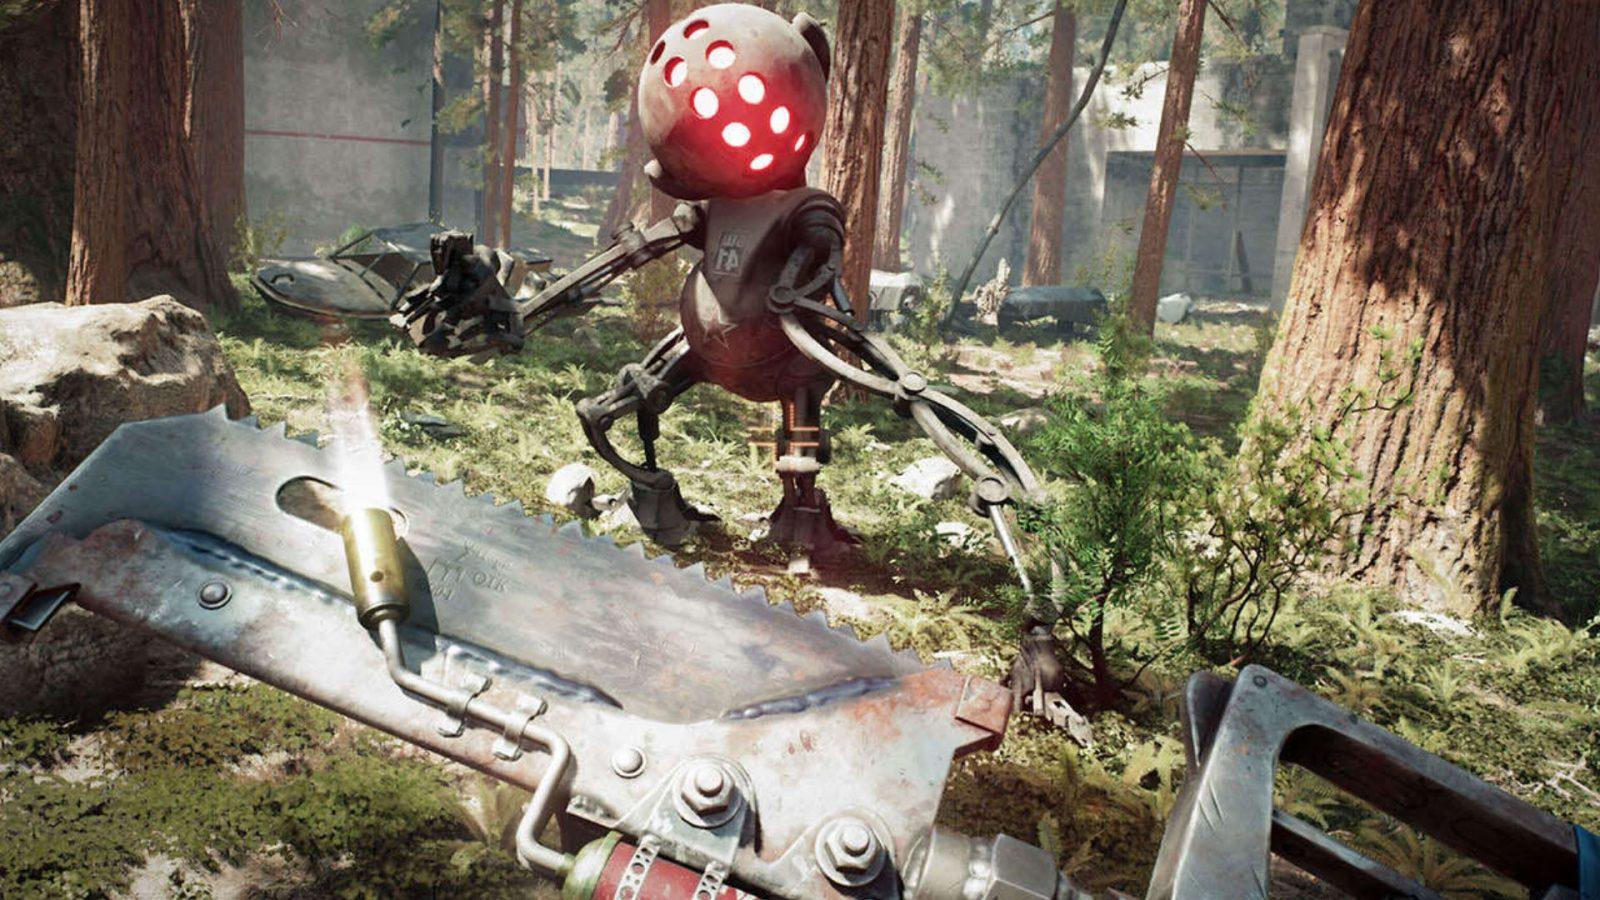 Atomic Heart controversy explained: Russia involvement rumors spark concern  - Dexerto